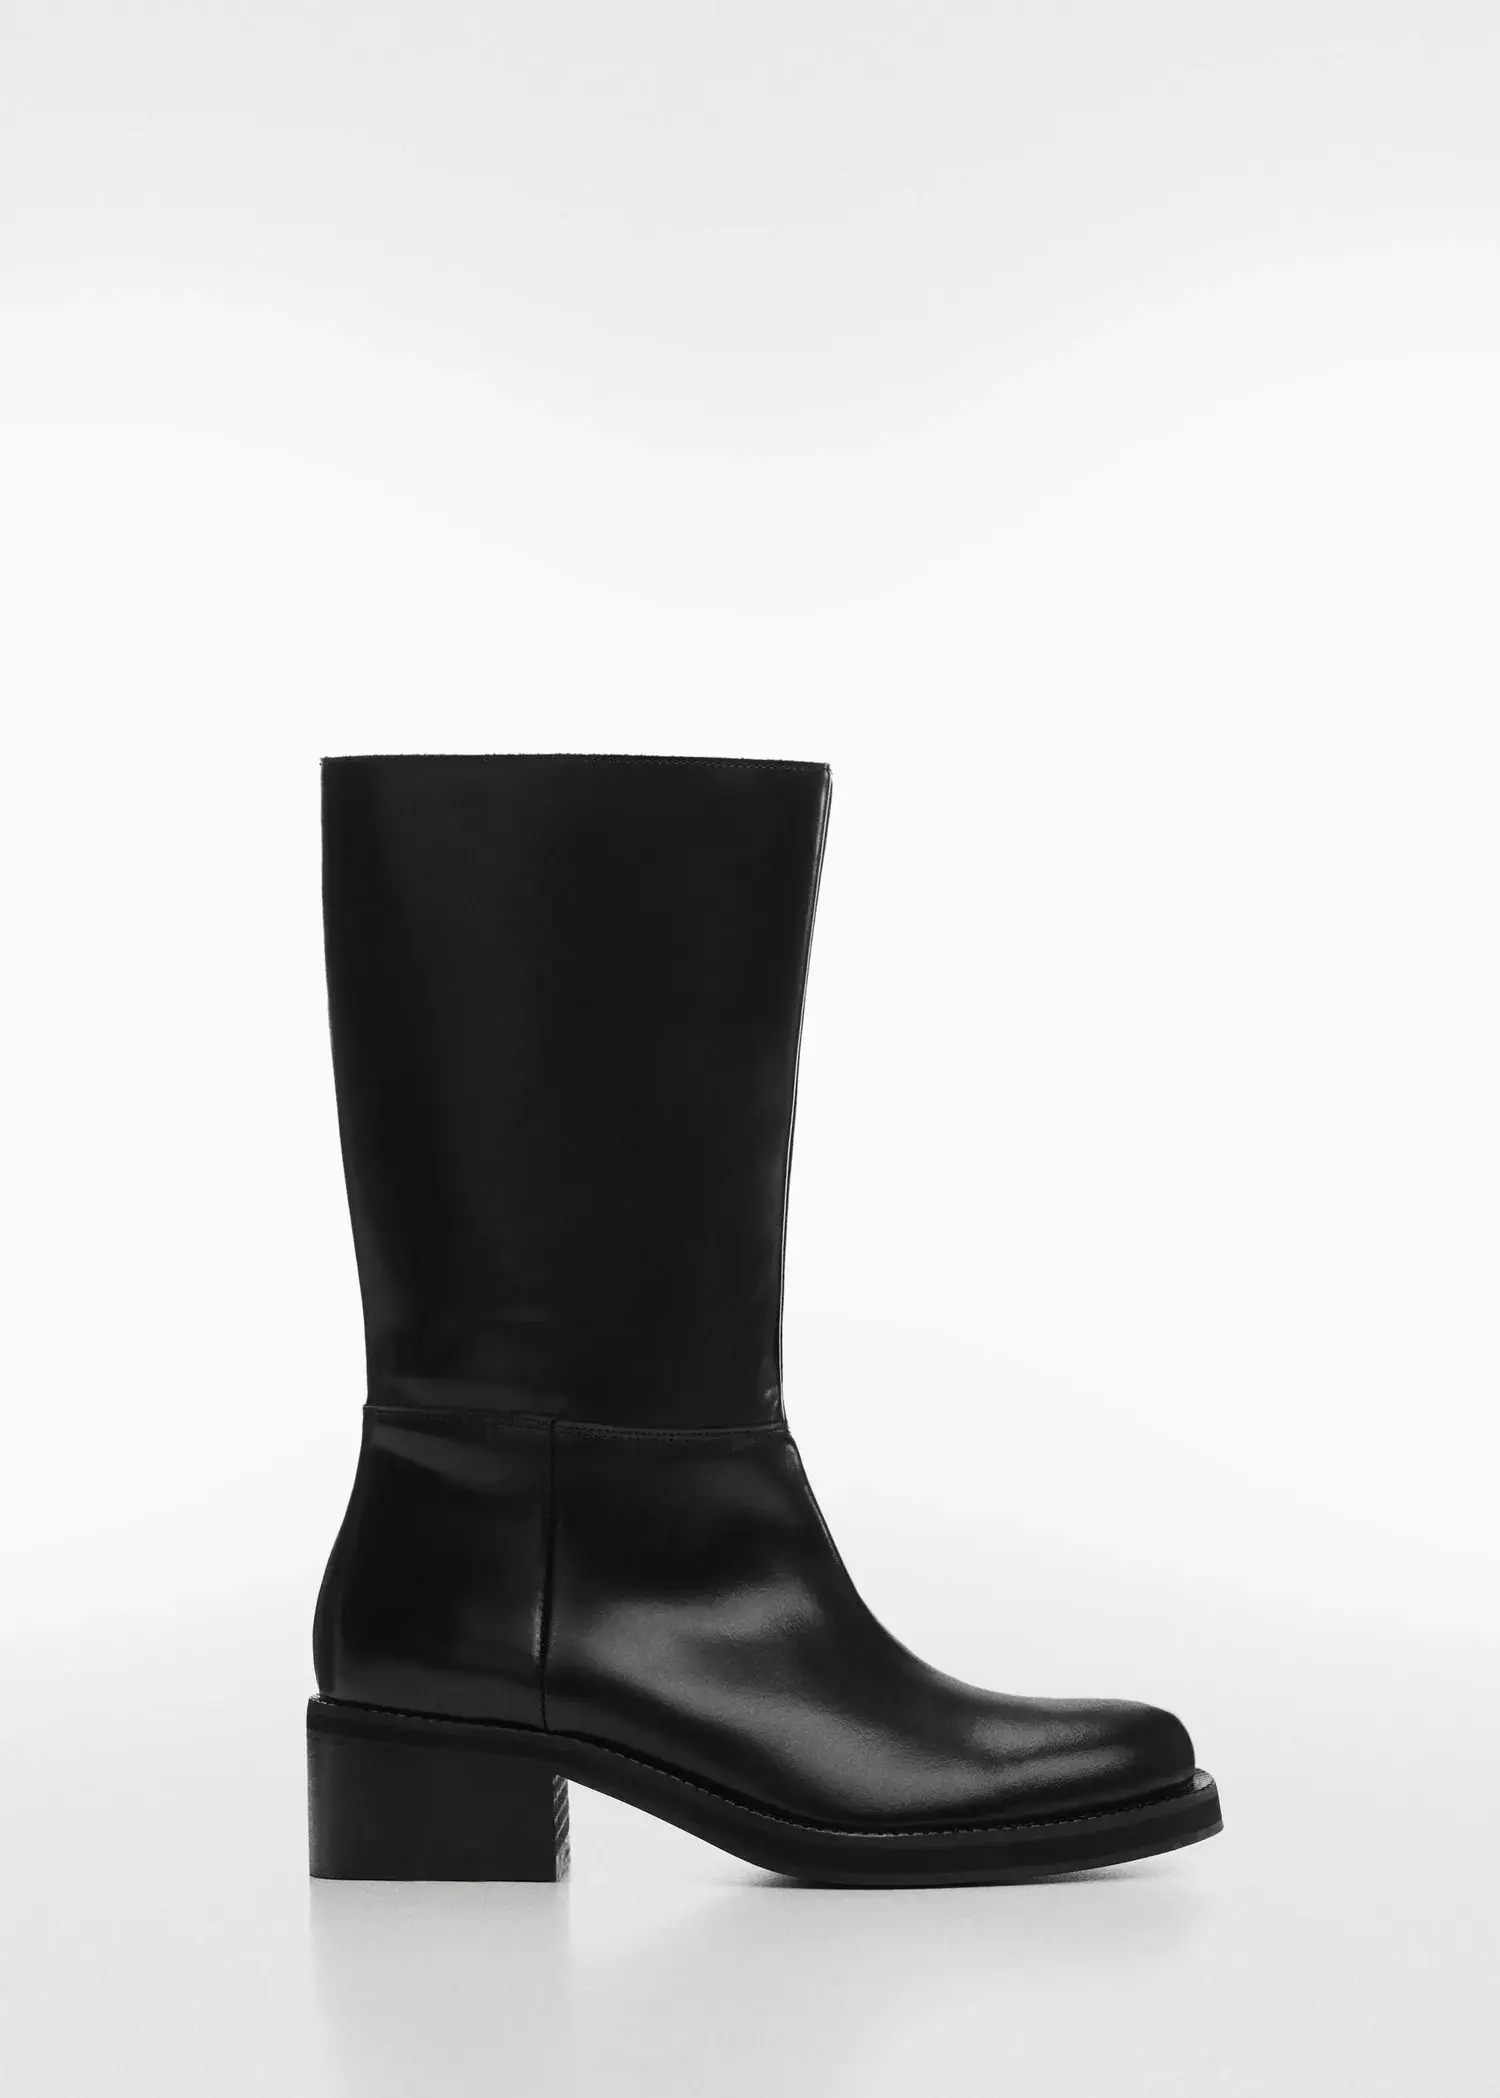 Mango Leather boots with zipper closure. 2